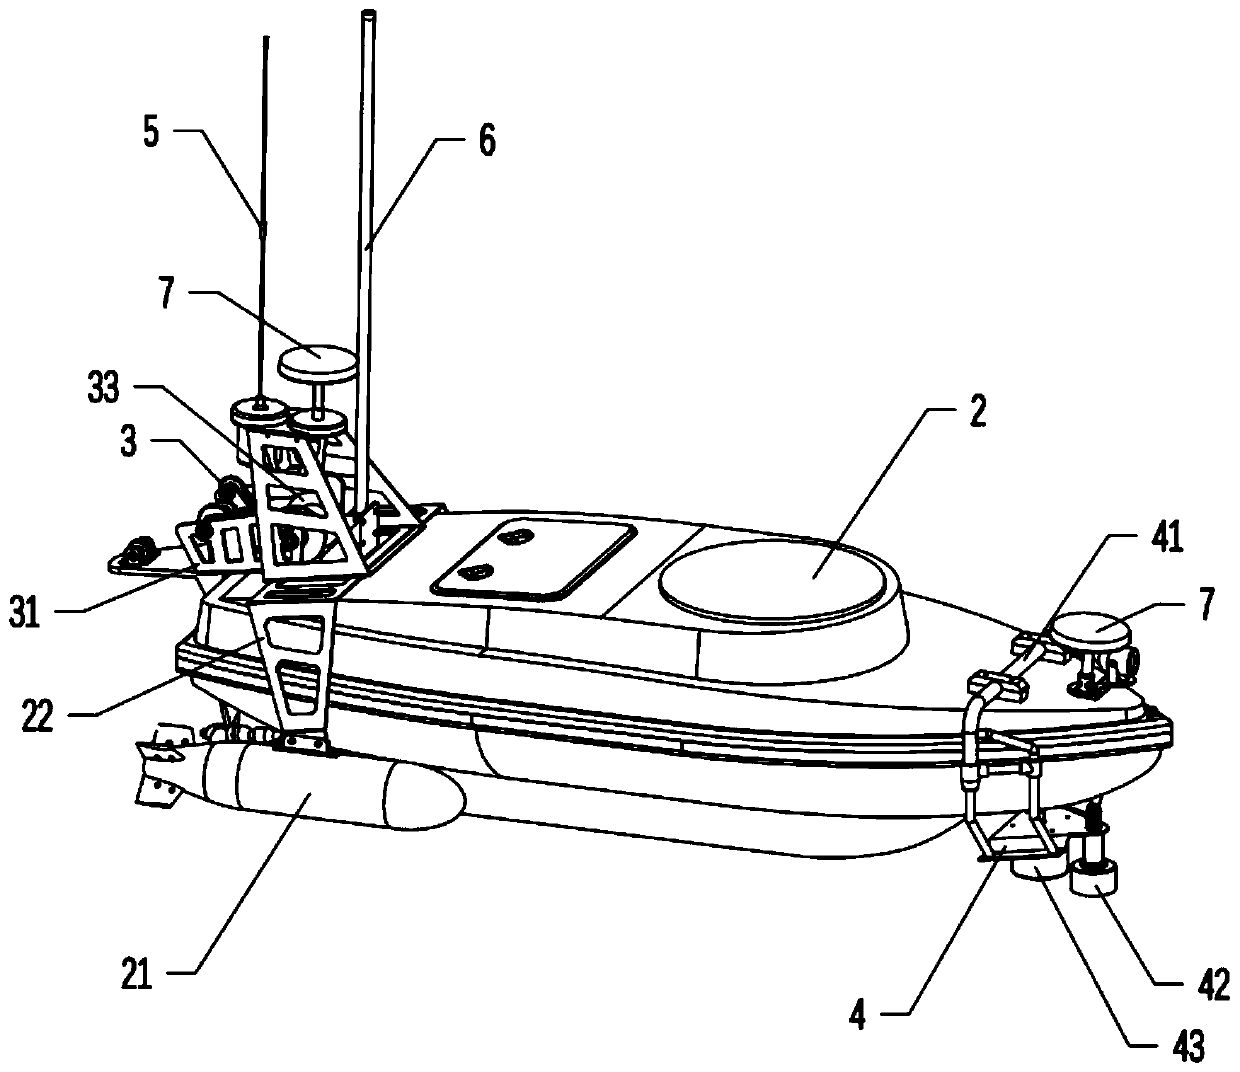 Unmanned-ship-towed underwater magnetic detection system